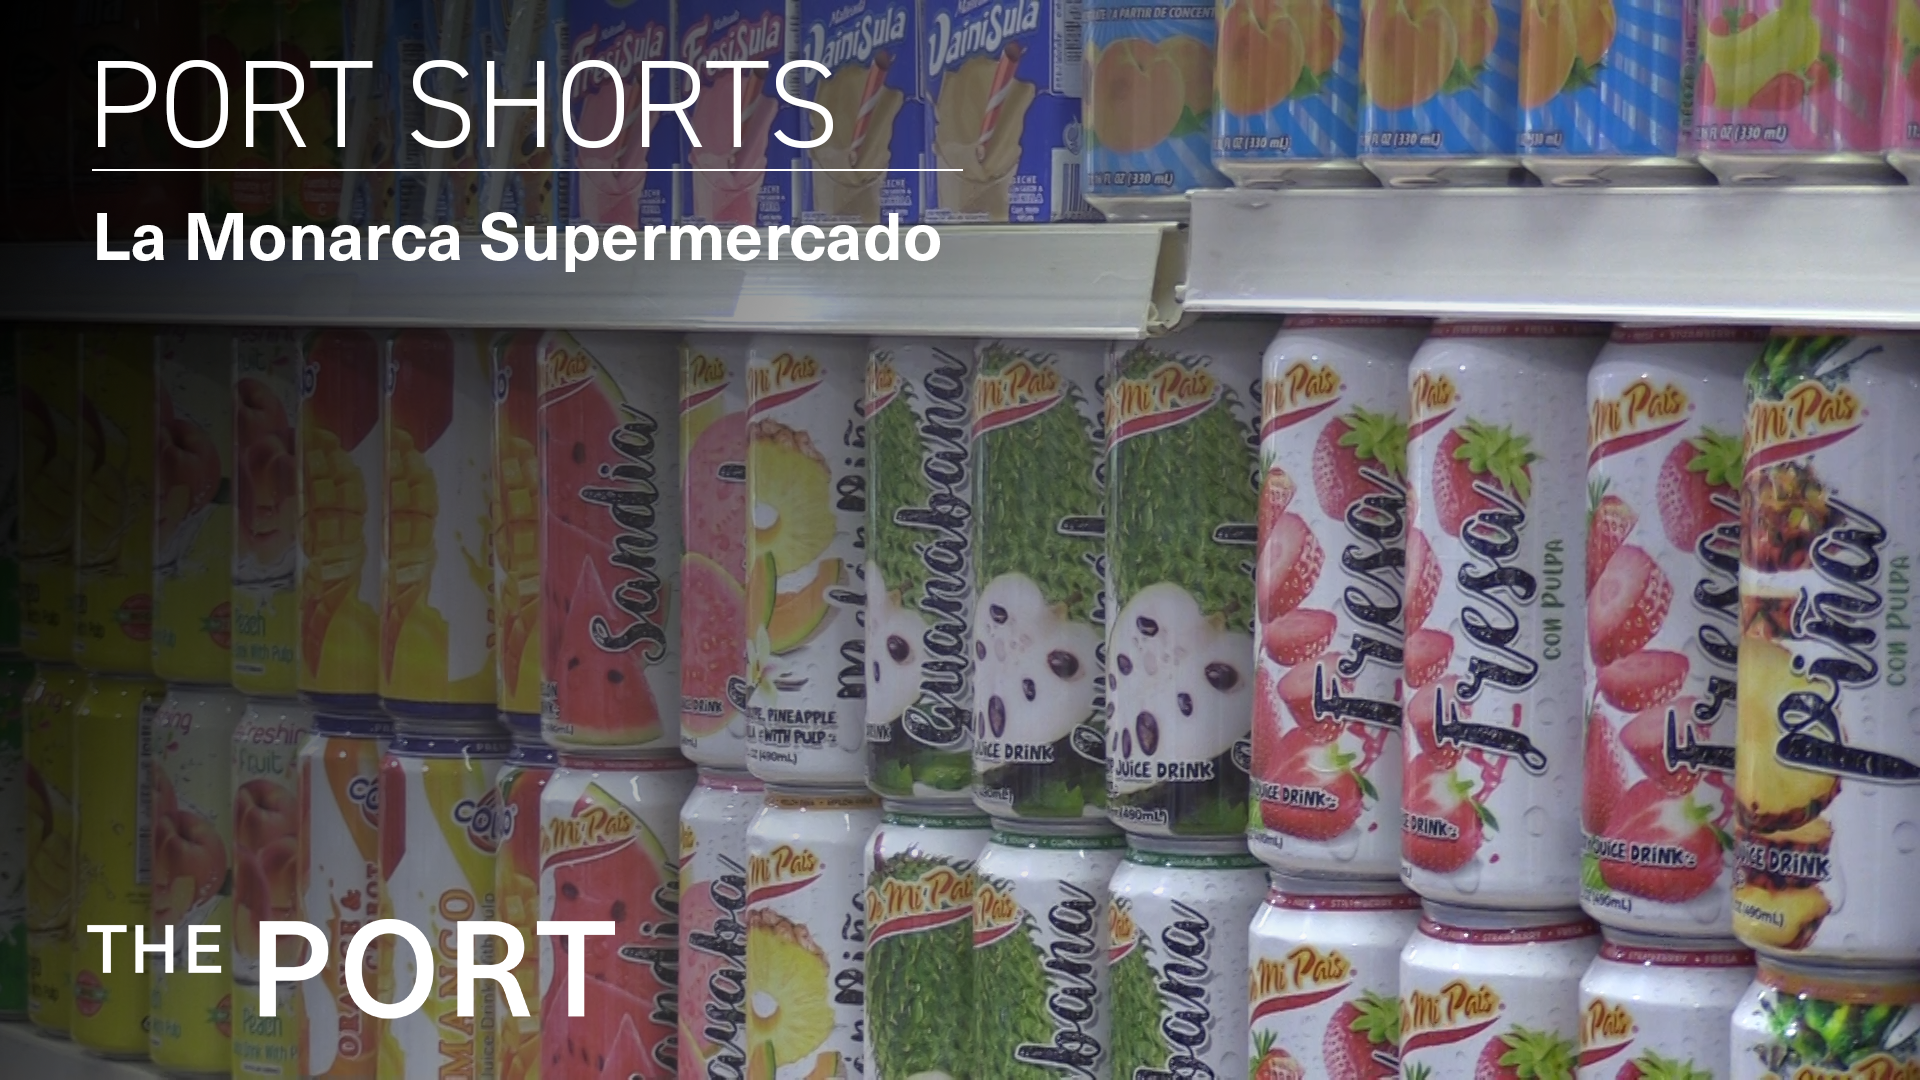 Image of brightly colored cans of juice lined up neatly on a shelf overlaid with the text "Port Shorts: La Monarca Supermercado"